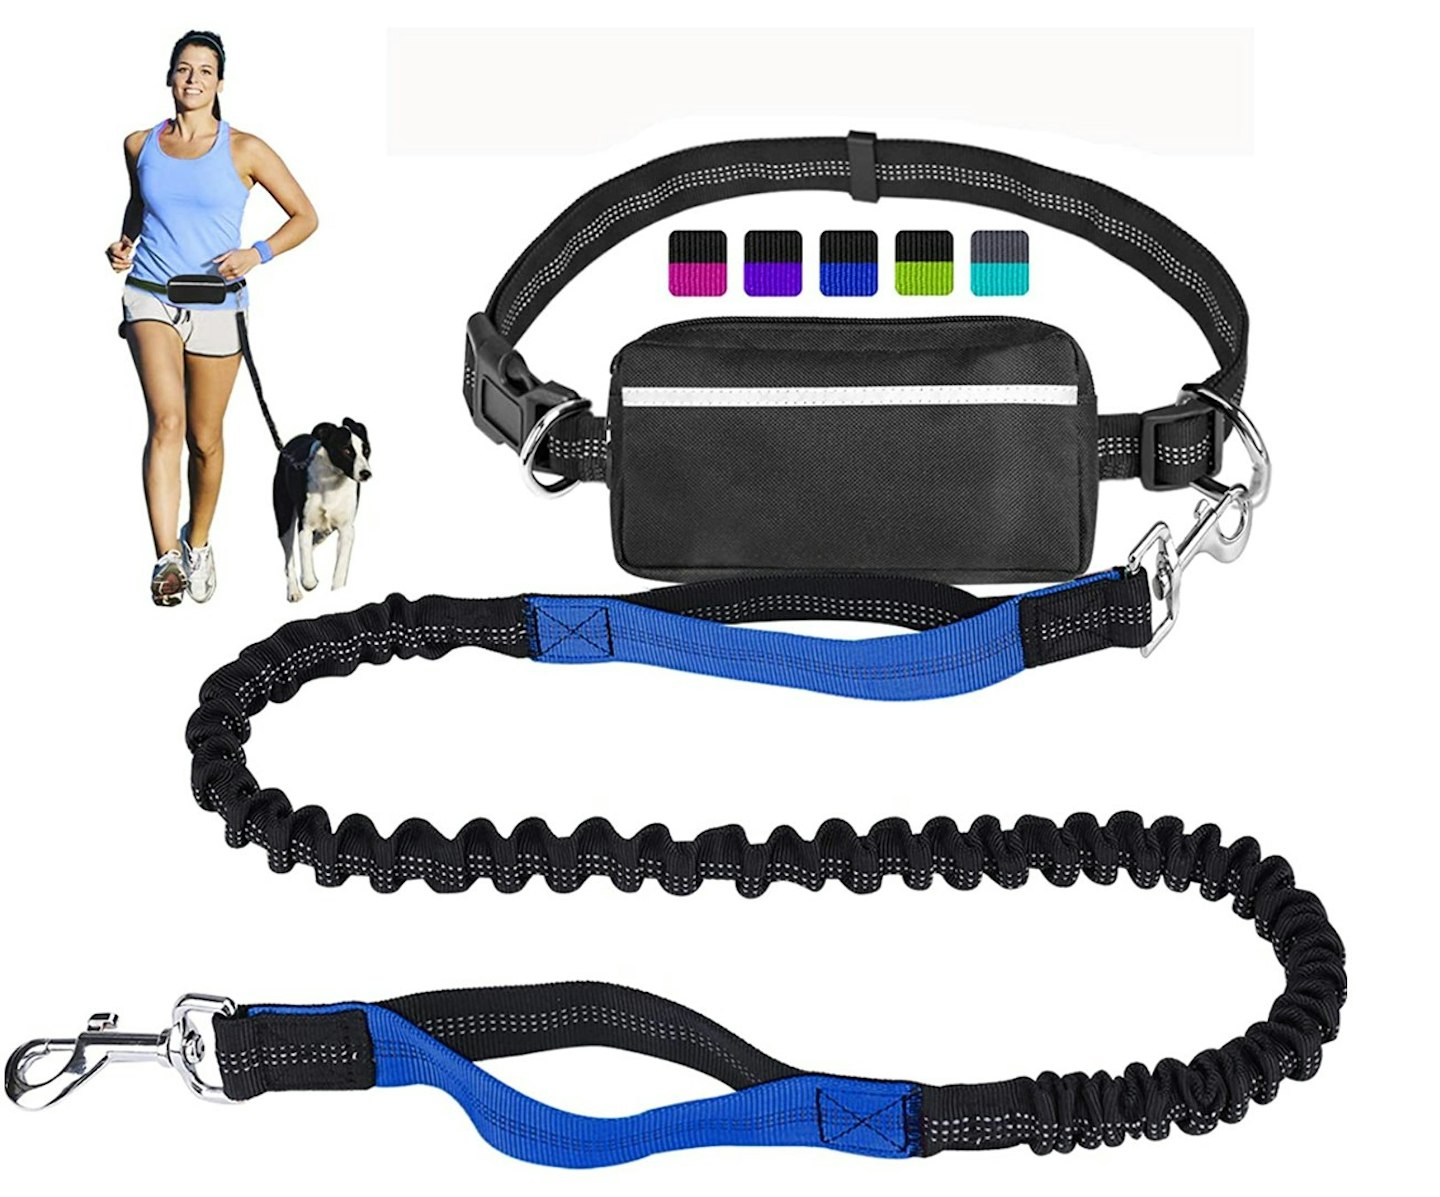  Hands Free Dog Lead for Running Walking Training Hiking